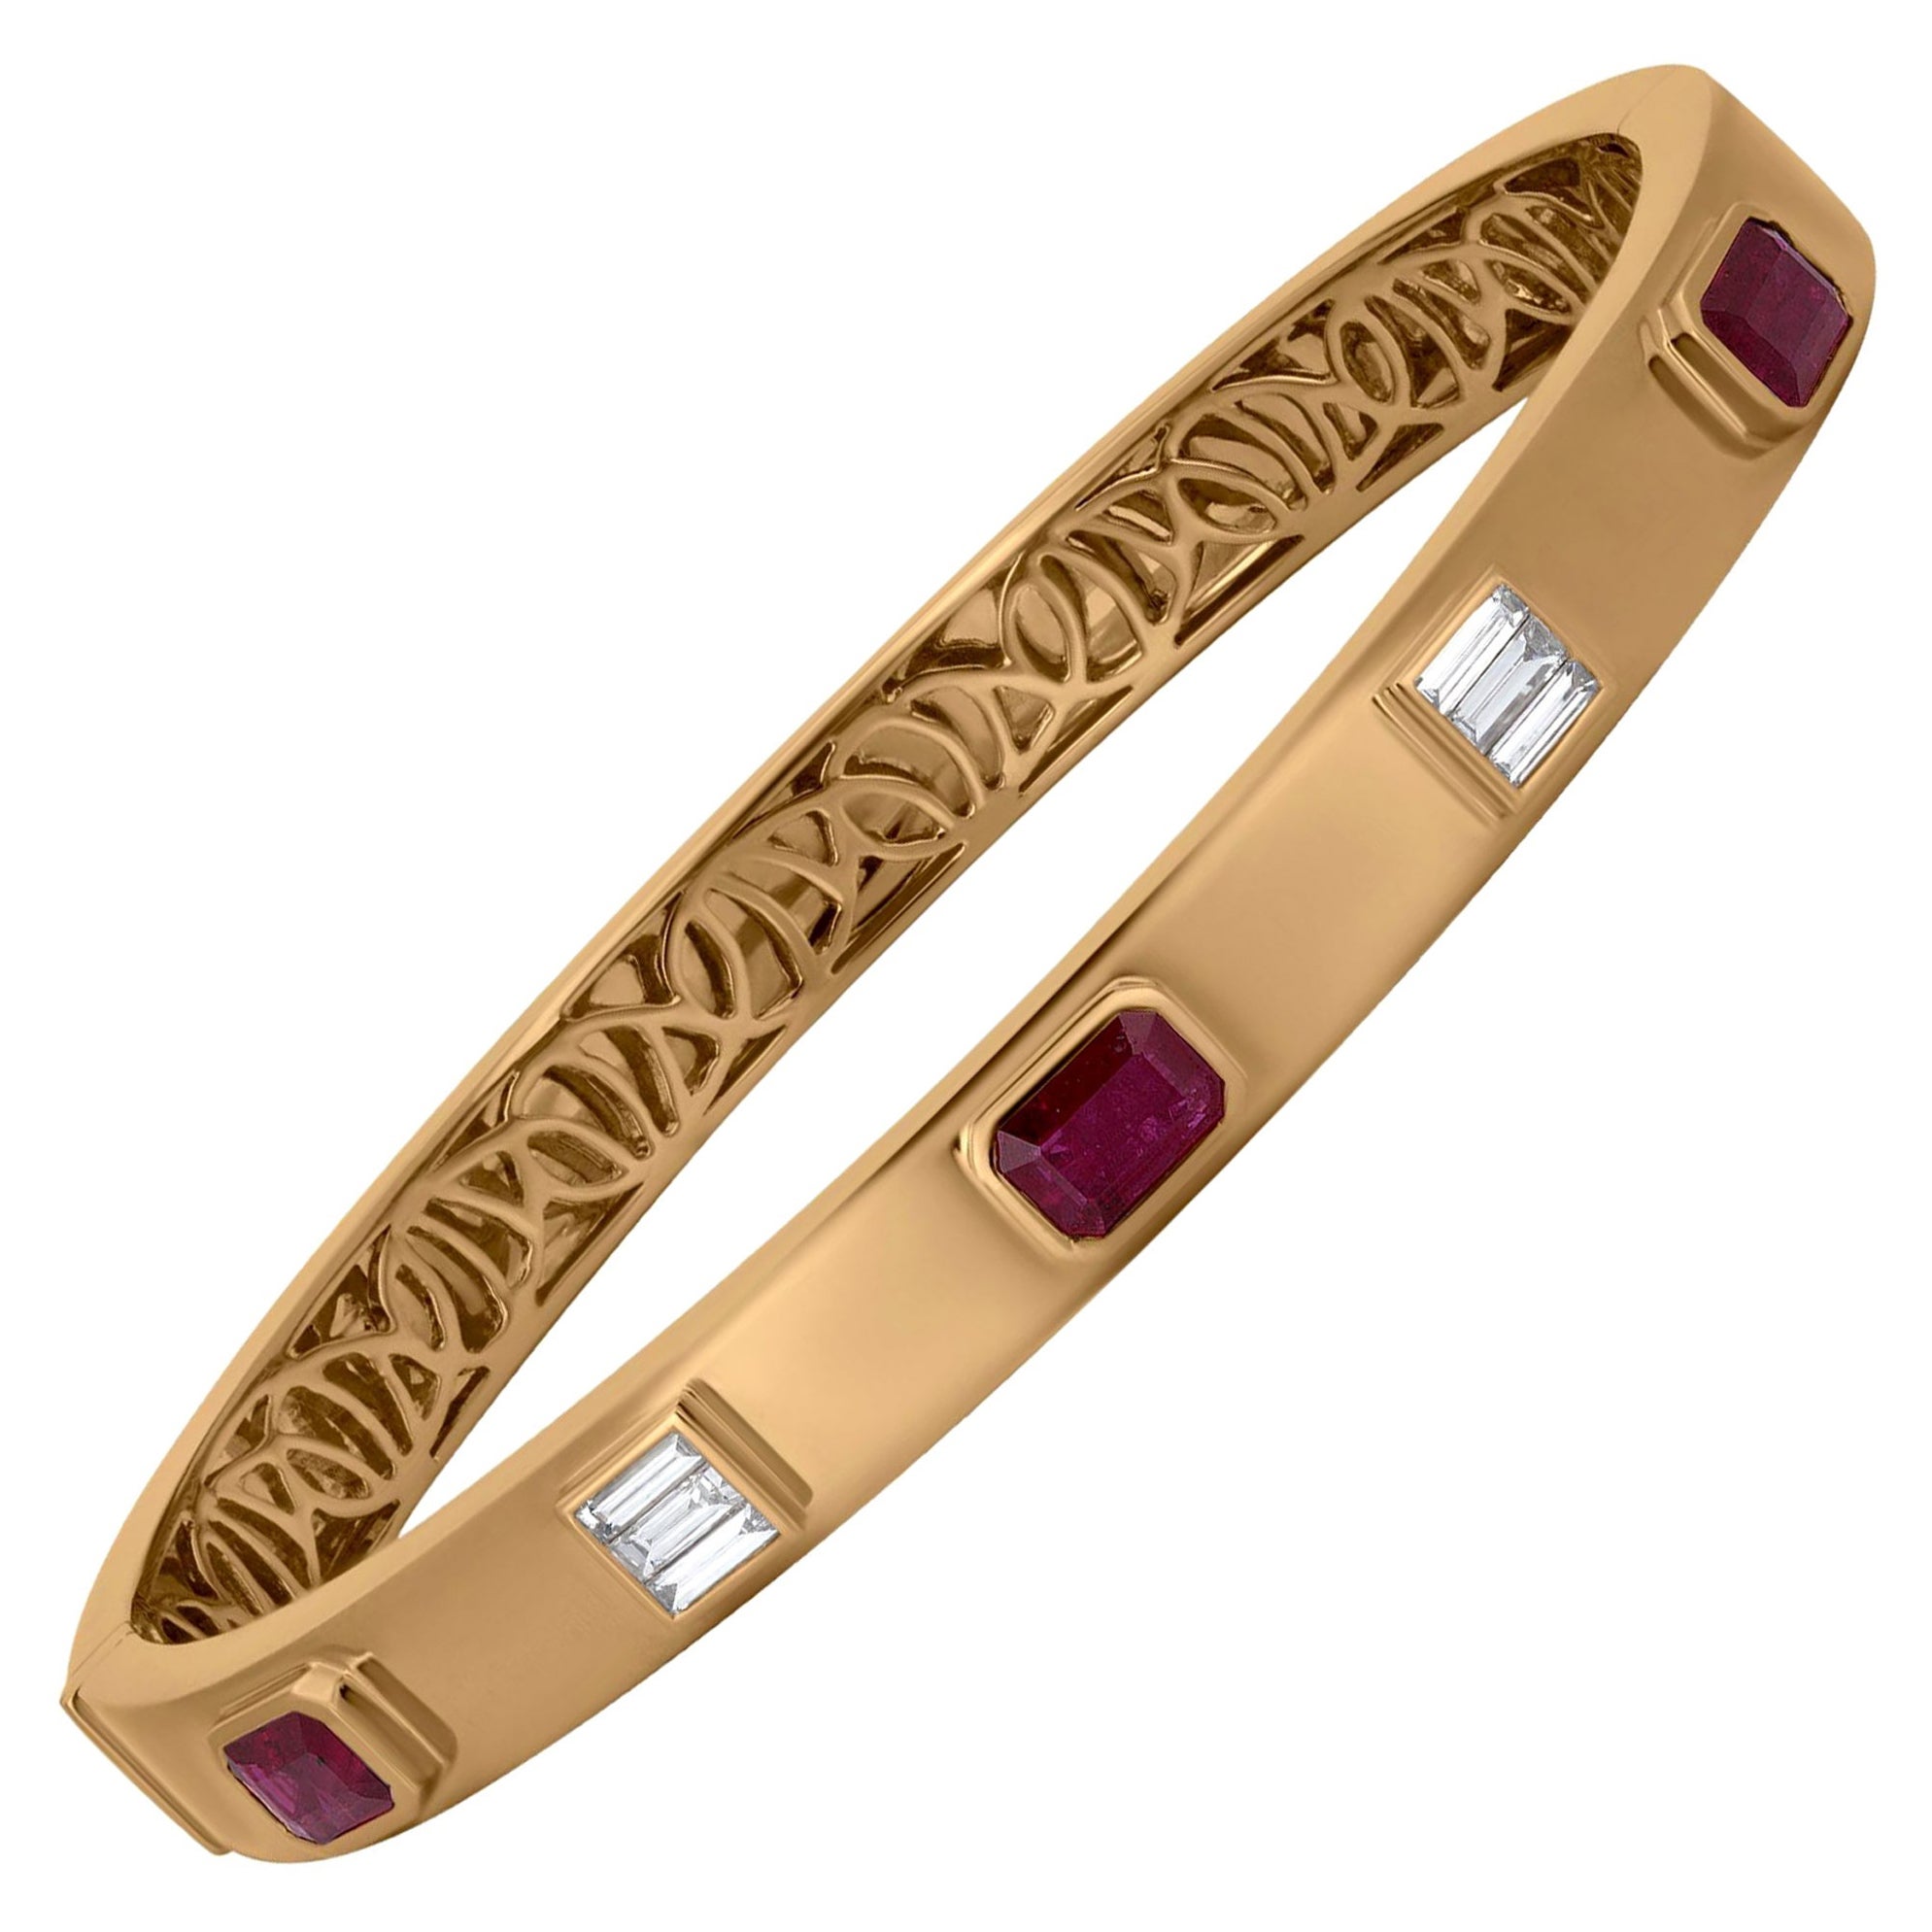 Nigaam 1.83 Cts. Ruby and 0.25 Cts. Diamond Bangle Bracelet in 18k Yellow Gold